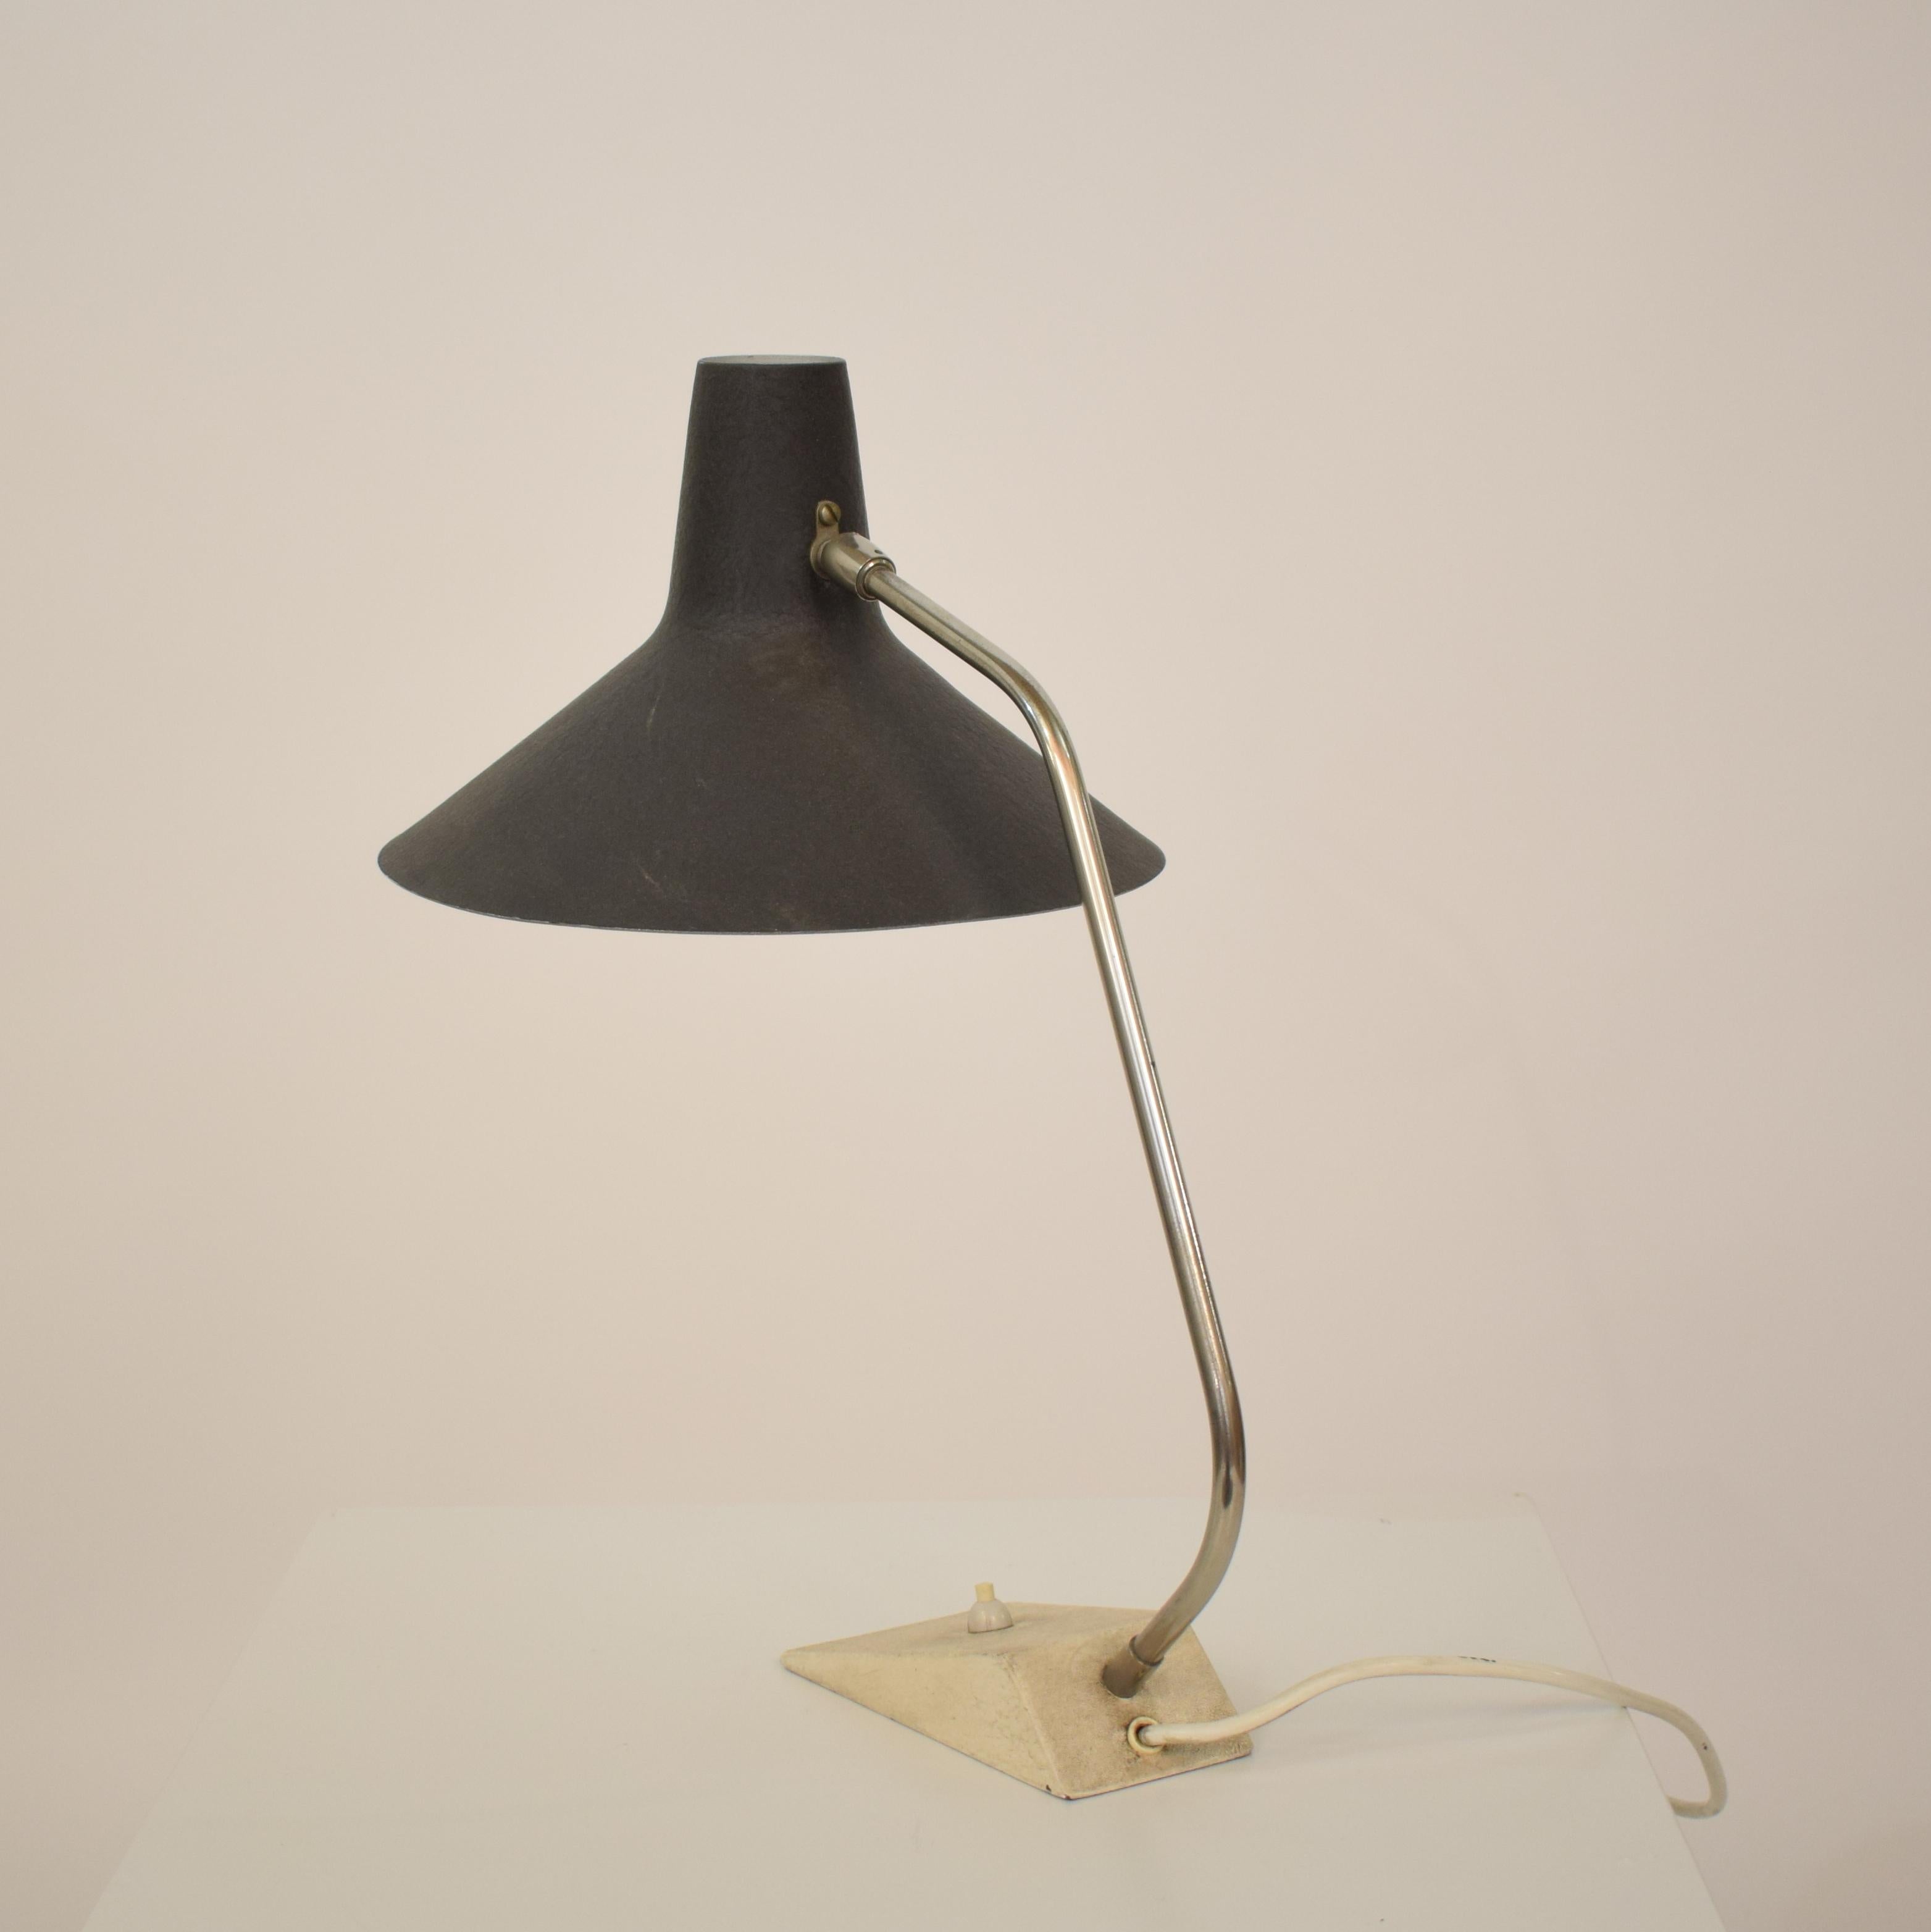 Midcentury German Grey, Chrome and White Table Lamp by Gebrüder Cosack, 1950s For Sale 2